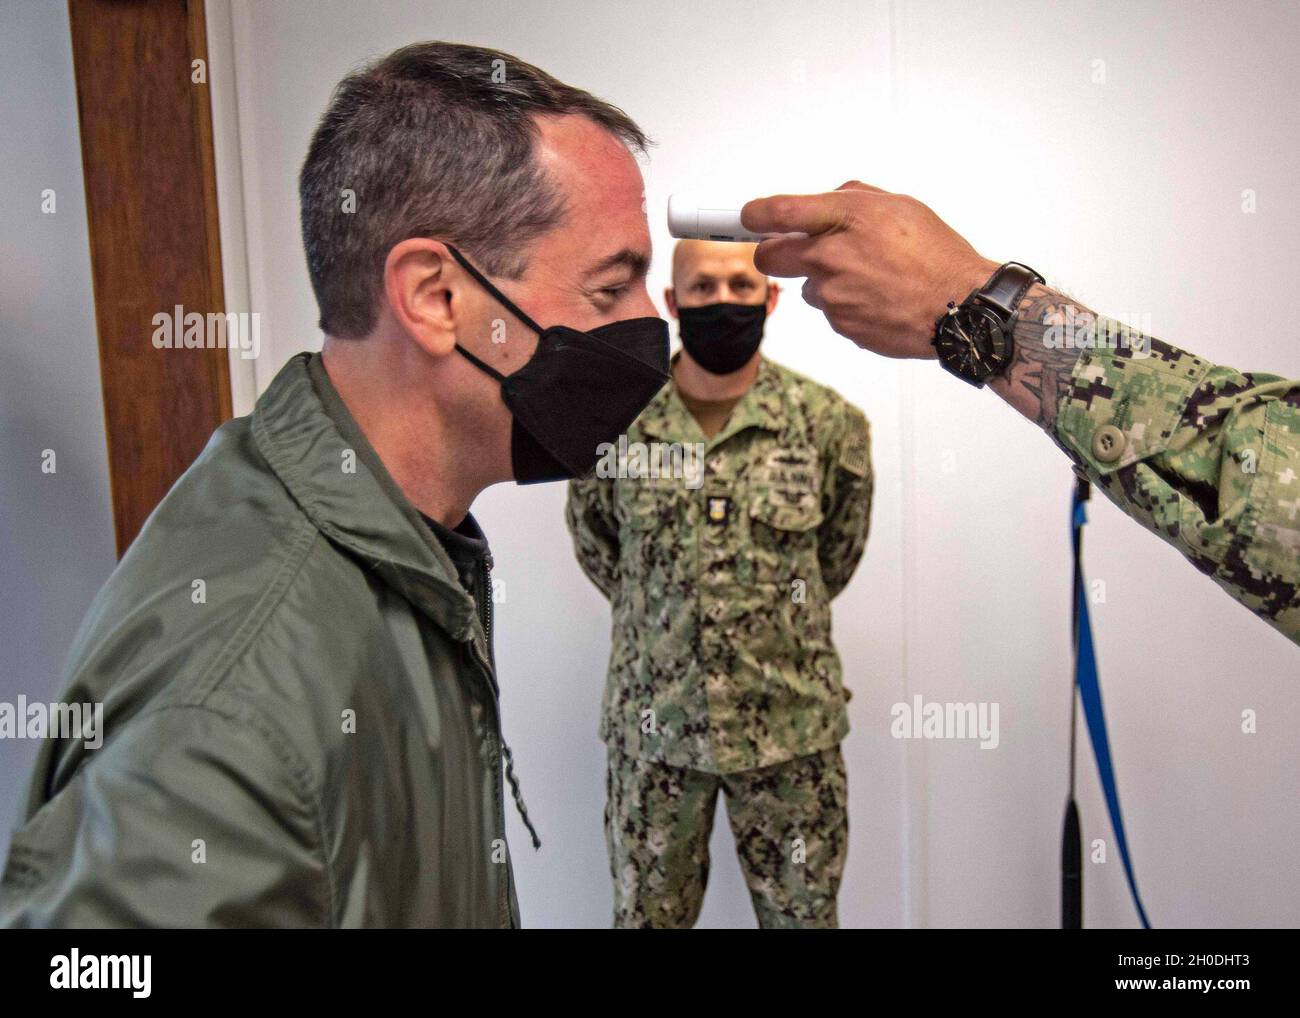 210202-N-NB178-1029 NORFOLK (Feb. 2, 2021) Capt. Todd Marzano, commanding officer of Pre-Commissioning Unit (PCU) John F. Kennedy (CVN 79), gets his temperature checked by the quarterdeck watch at Building U-40 aboard Naval Station Norfolk. PCU John F. Kennedy has been under construction in Newport News since 2015 and is the second aircraft carrier to honor John F. Kennedy for his service to the nation, both as a naval officer and as the 35th President of the United States. Stock Photo